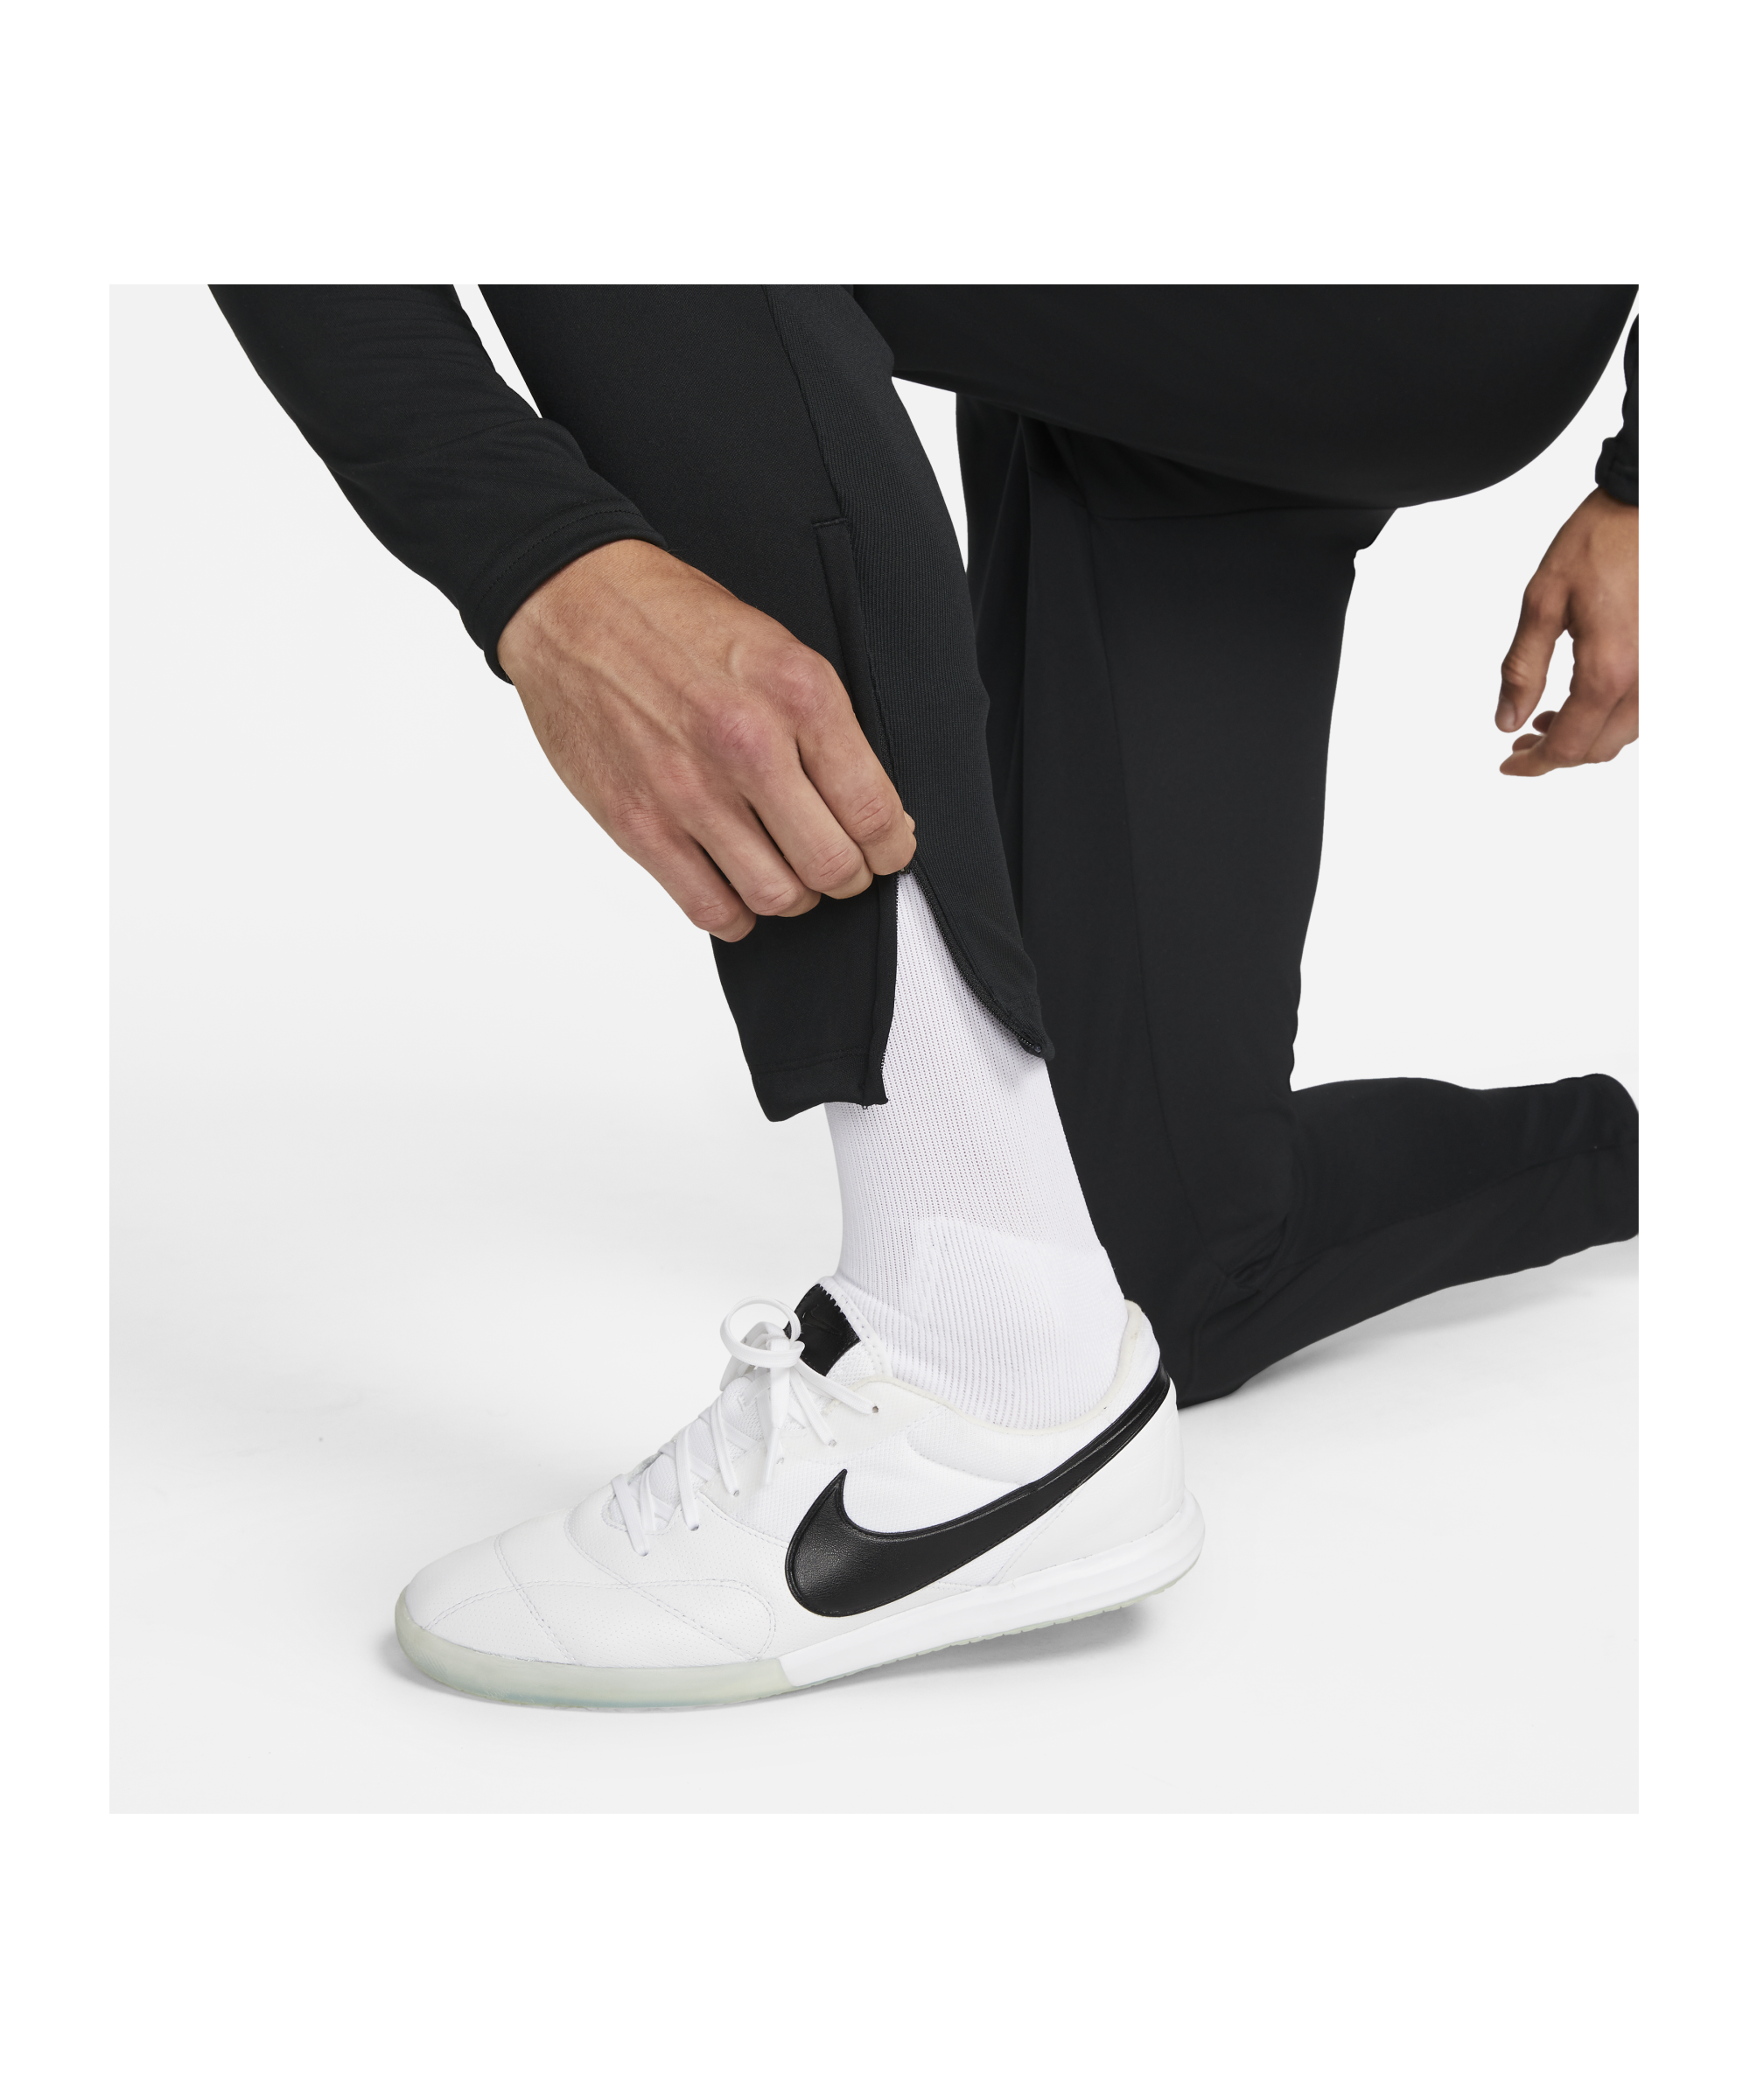 Pants Nike Therma-FIT Academy Winter Warrior Womens 